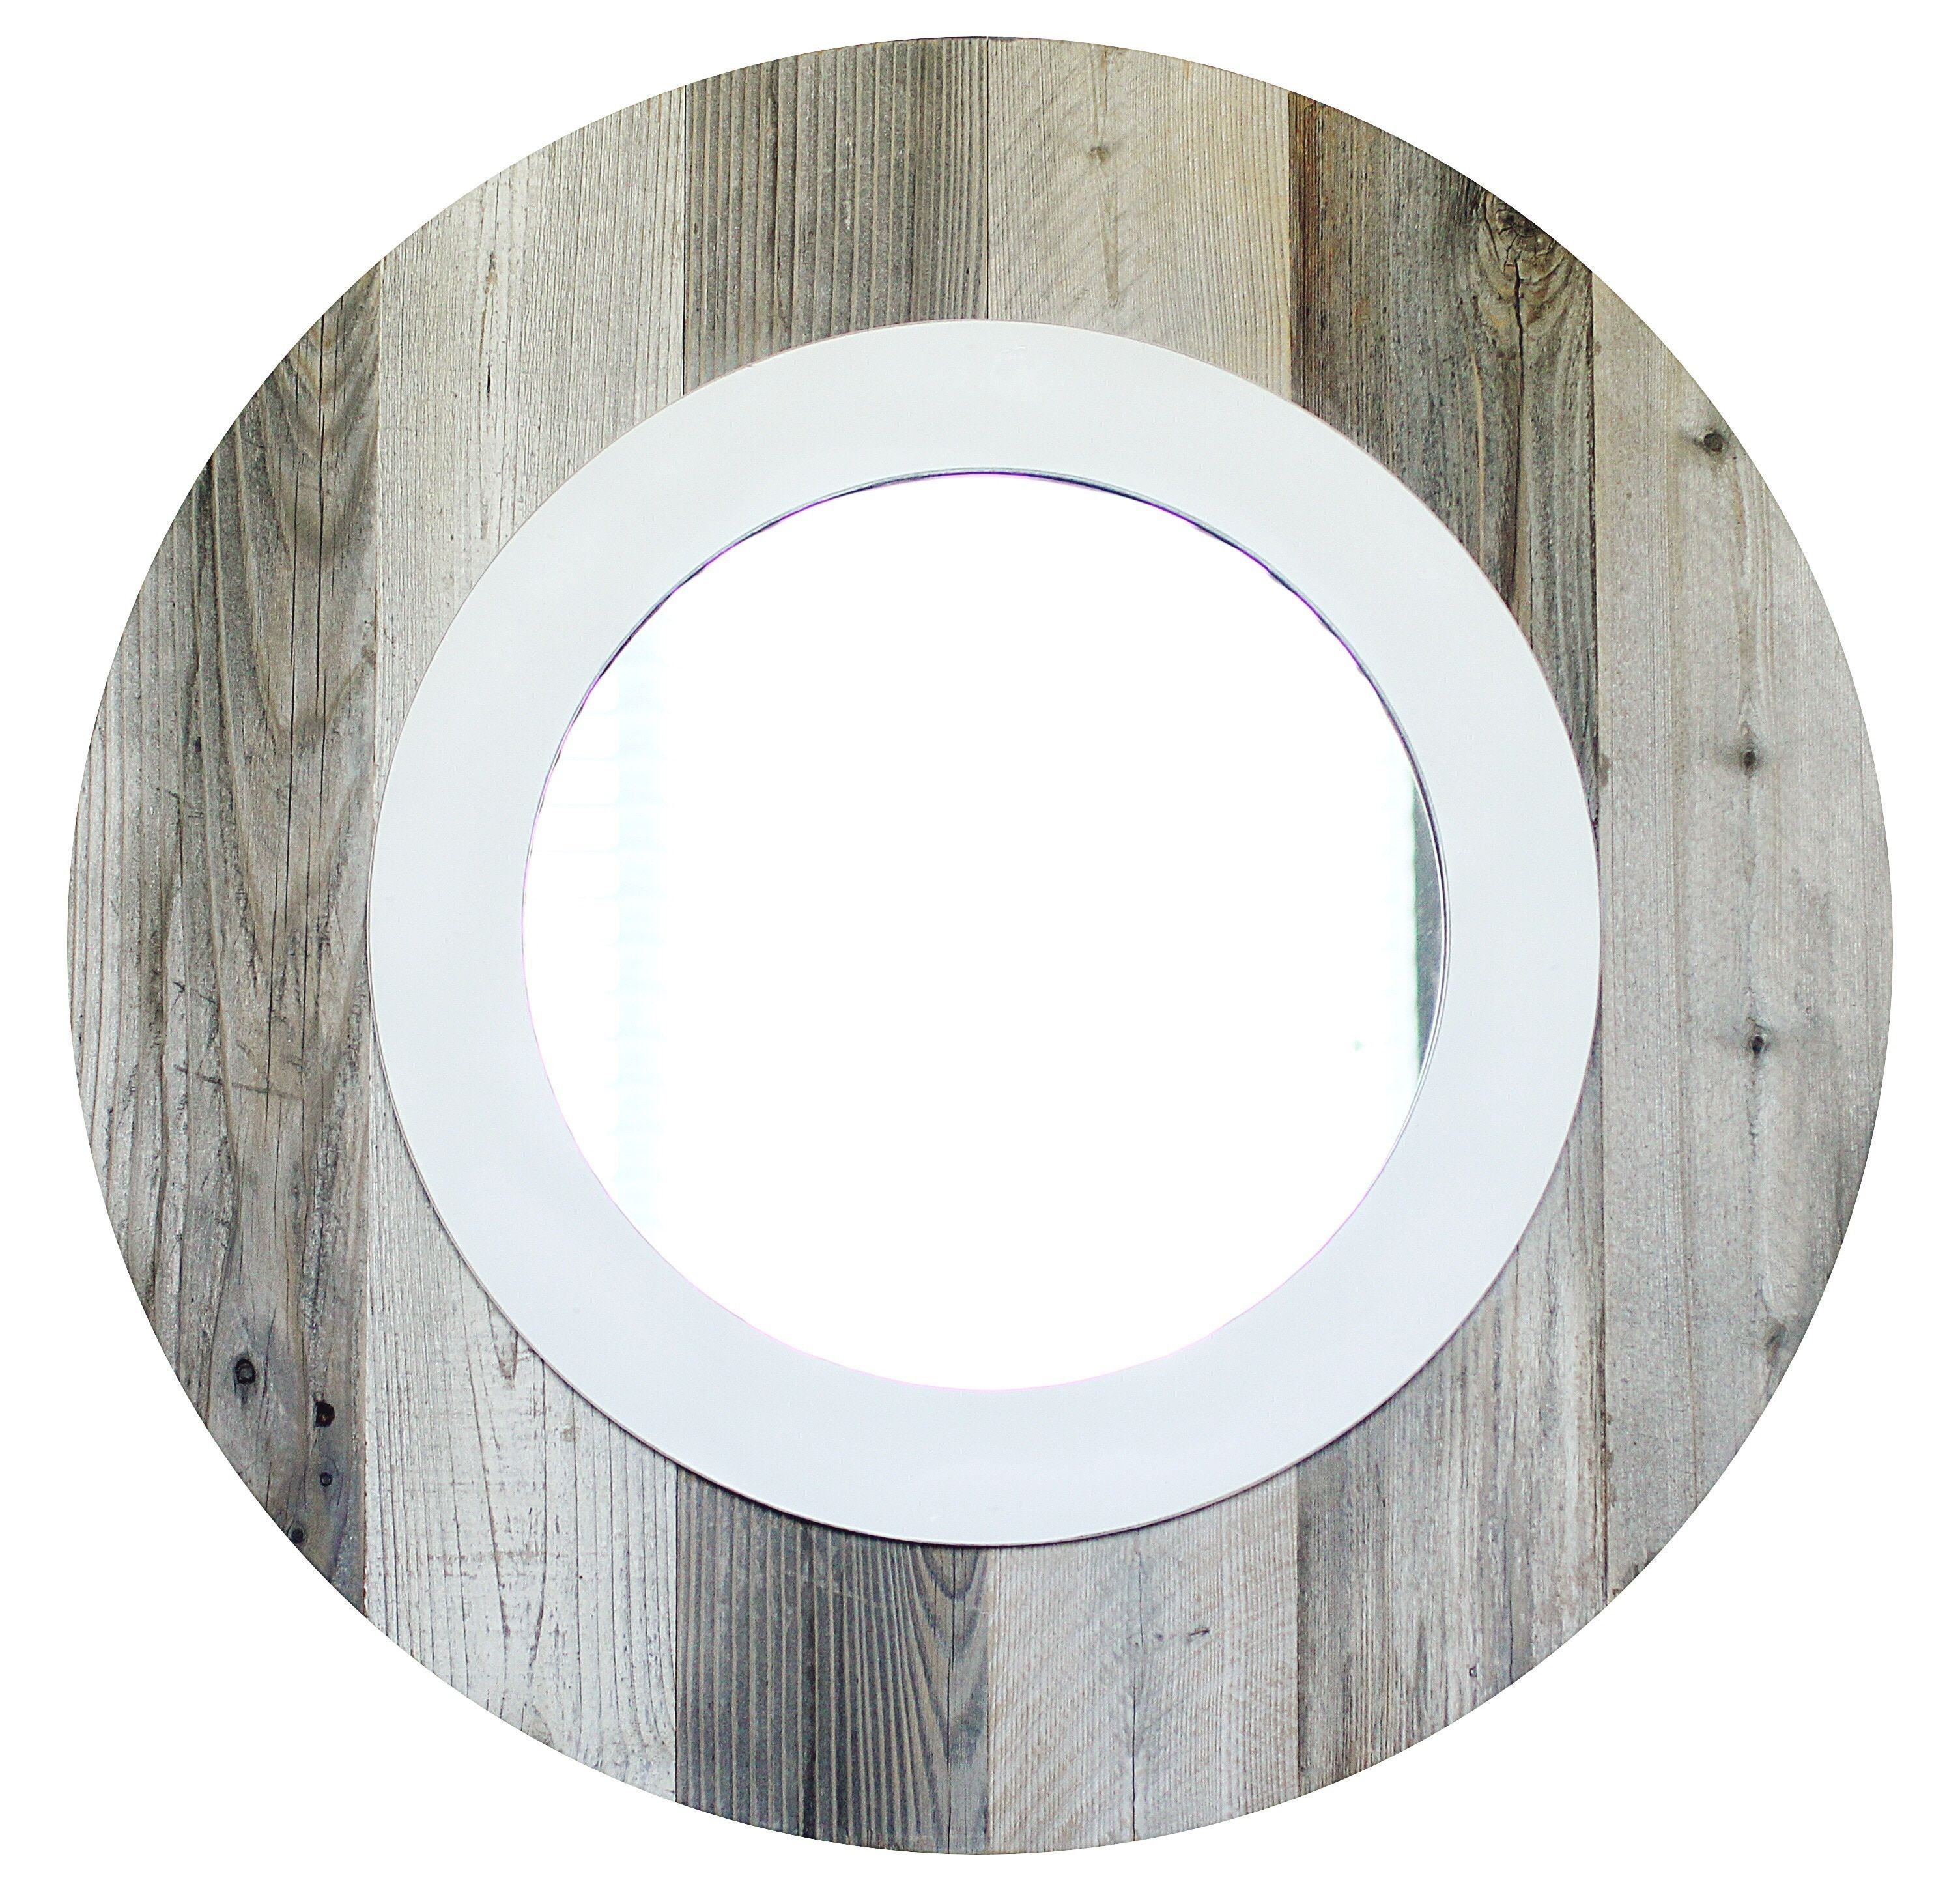 Rustic Mirrors | Wood, Metal & Farmhouse Framed Mirrors With Round Eclectic Accent Mirrors (View 30 of 30)